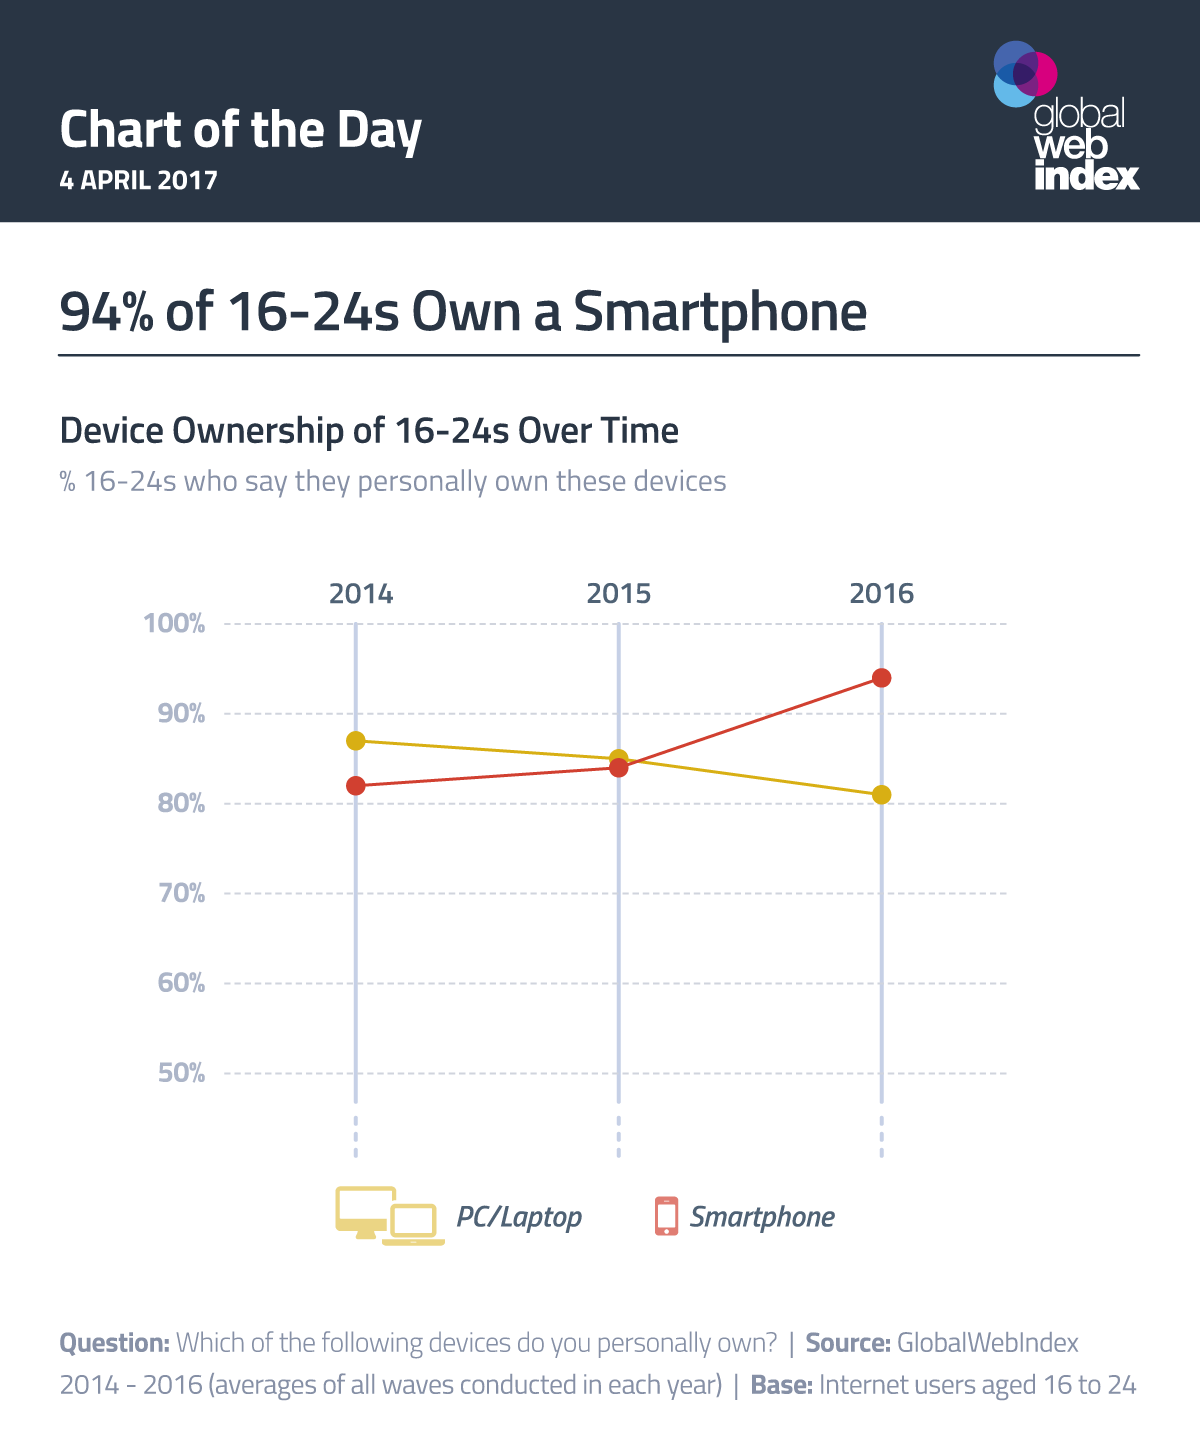 94% of 16-24s Own a Smartphone